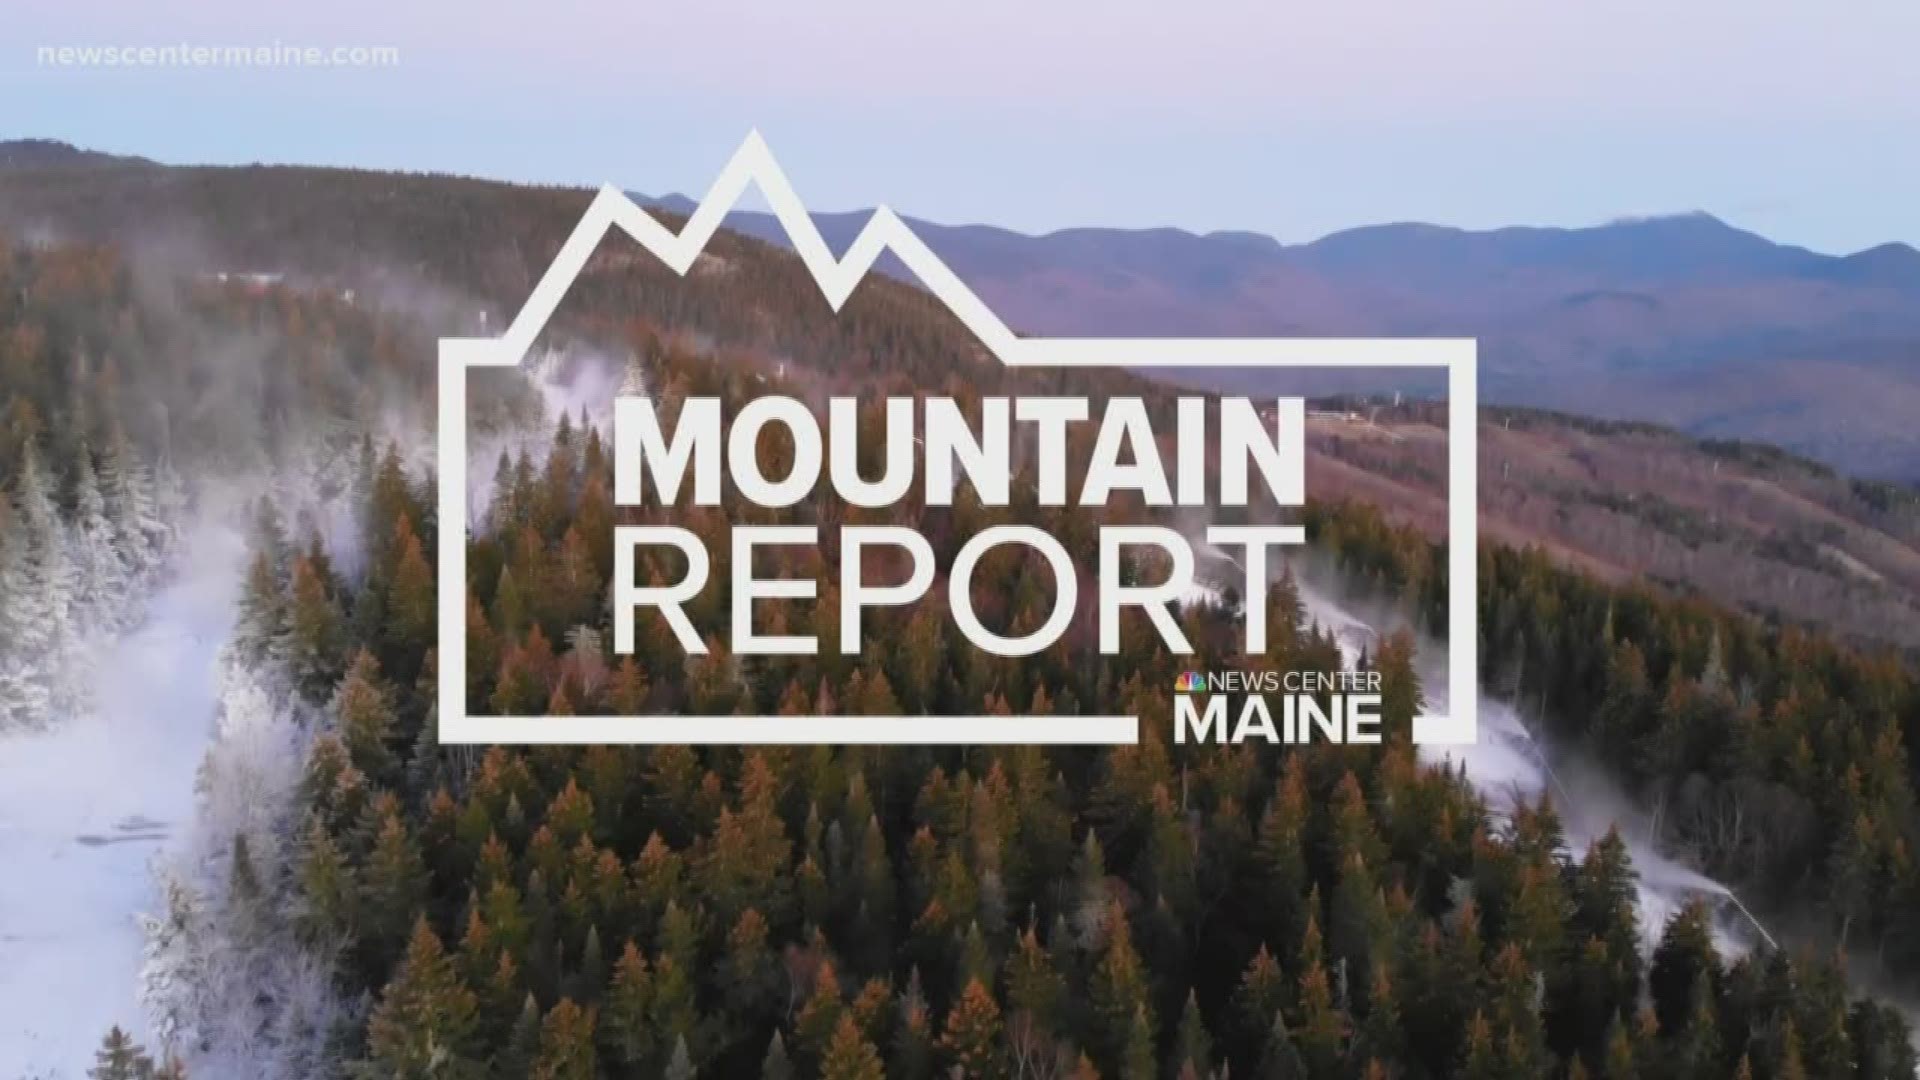 NEWS CENTER Maine's Weekend Mountain Report with Meteorologist Mallory Brooke.